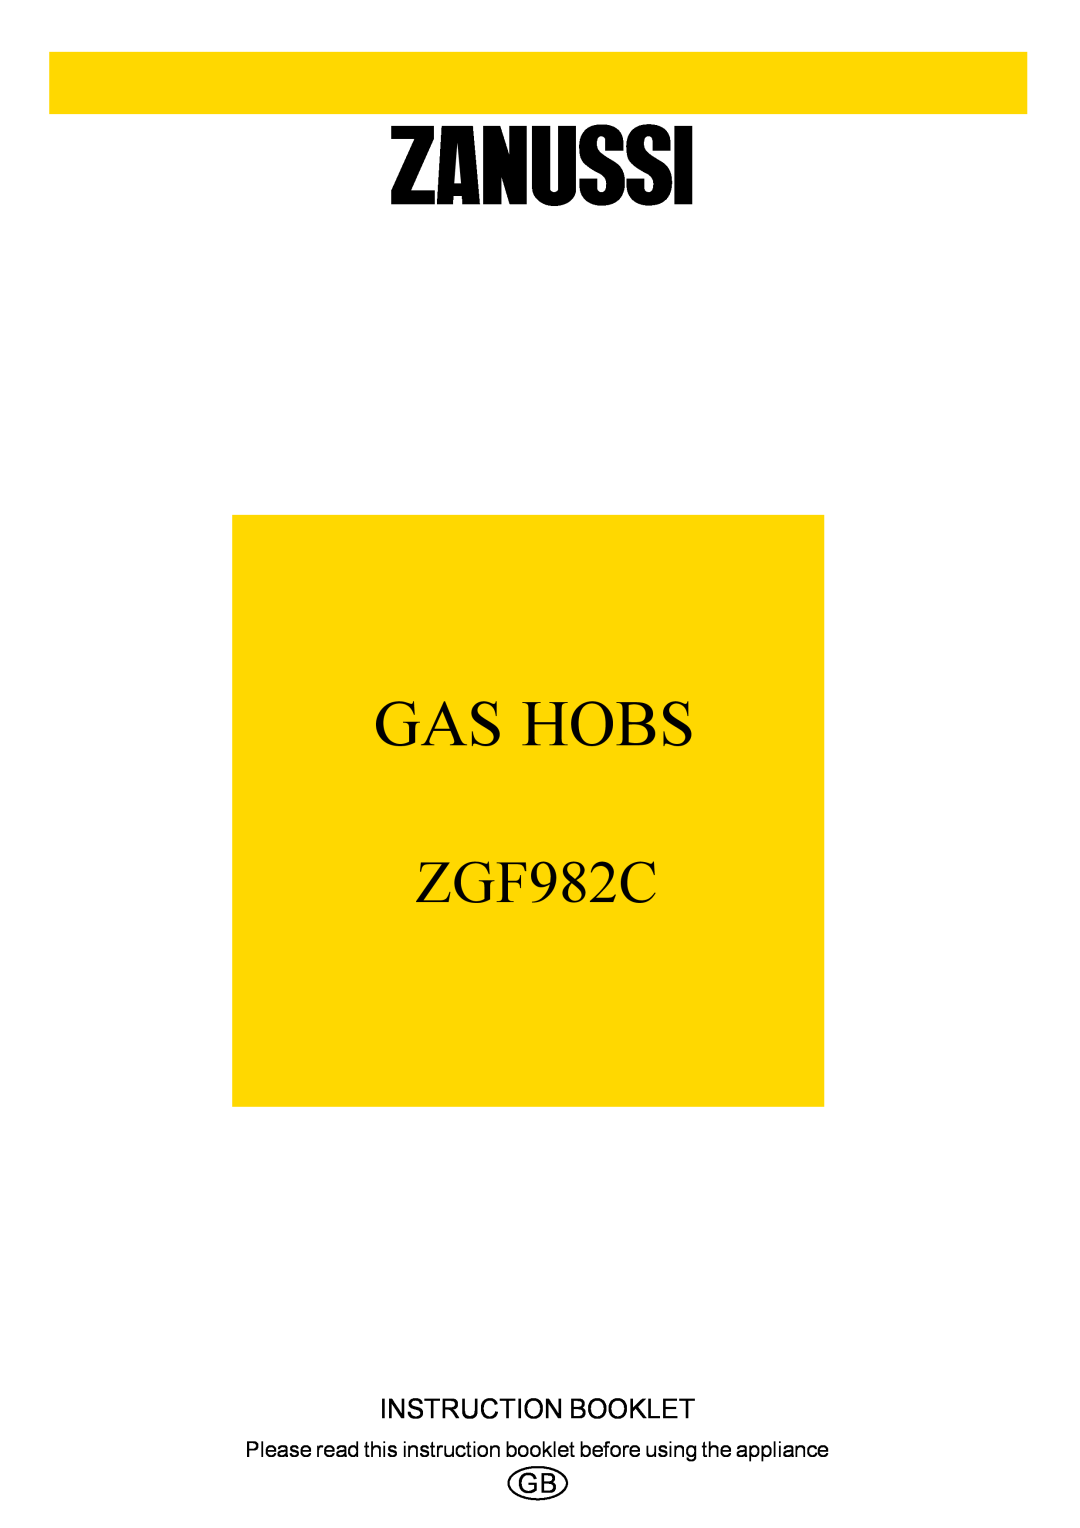 Zanussi ZGF982C manual Please read this instruction booklet before using the appliance, Gas Hobs, Instruction Booklet 